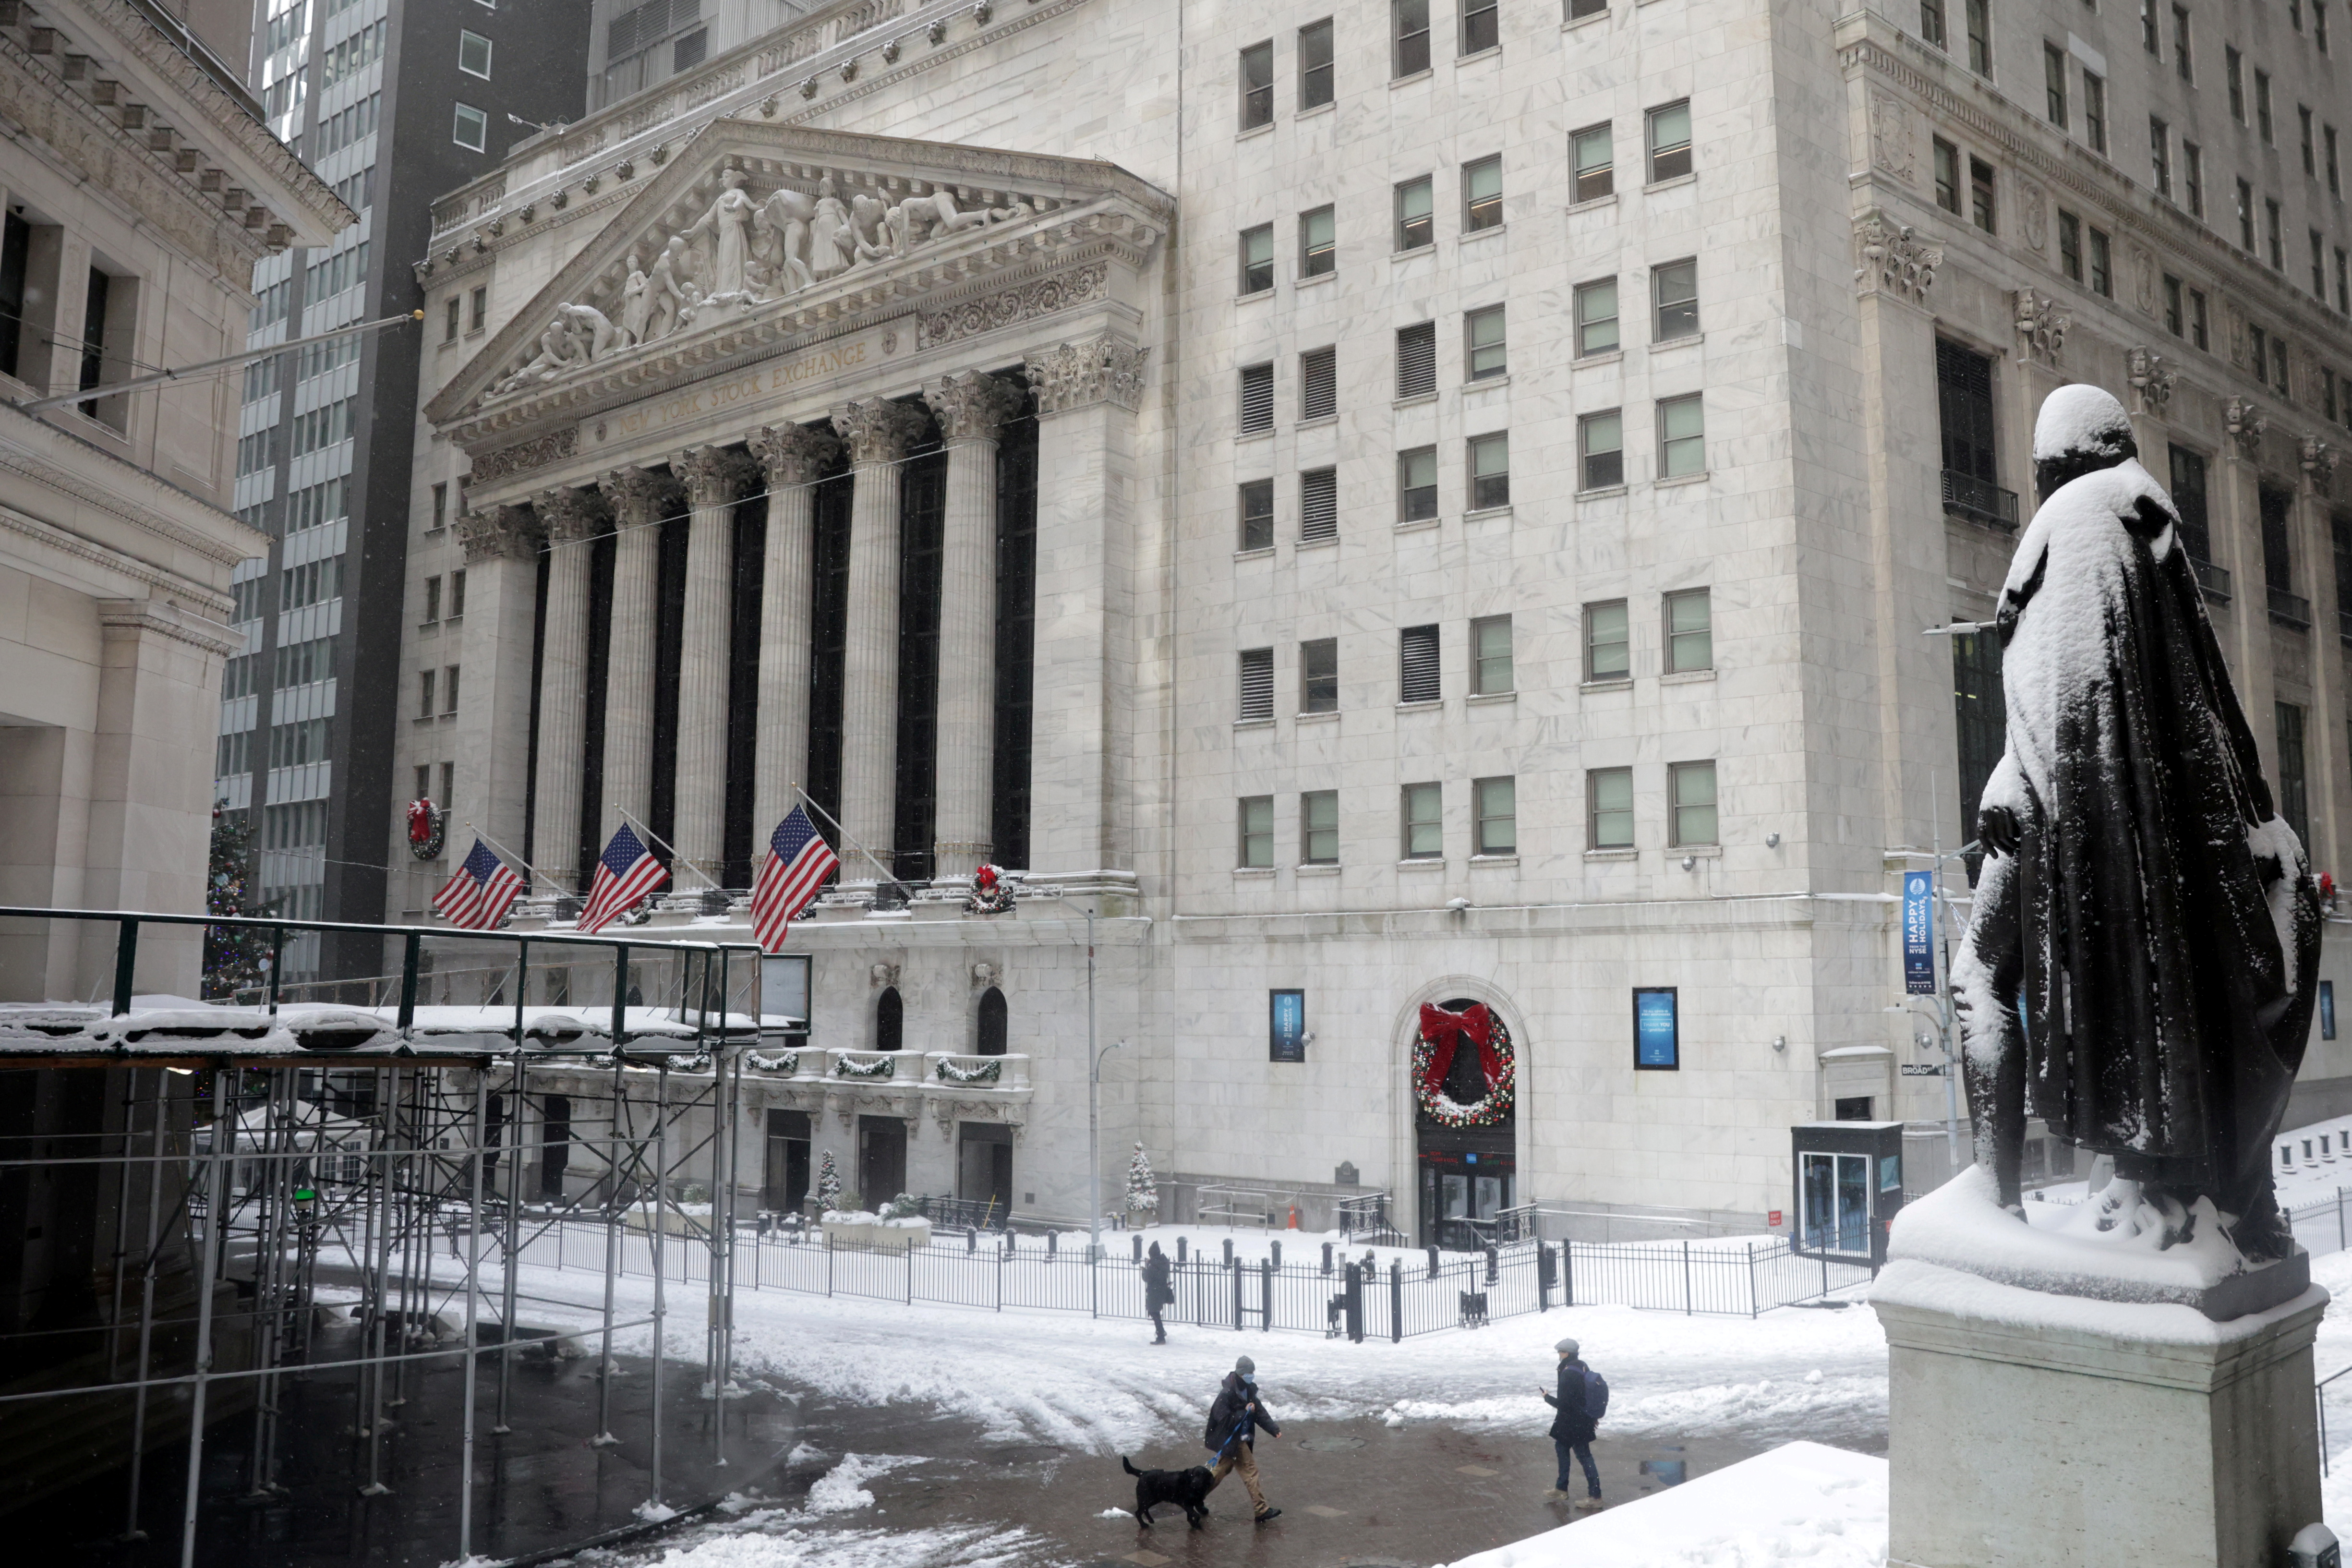 View of the NYSE building during snowfall in the Financial District of Manhattan, New York City, New York, U.S., December 17, 2020. REUTERS/Jeenah Moon